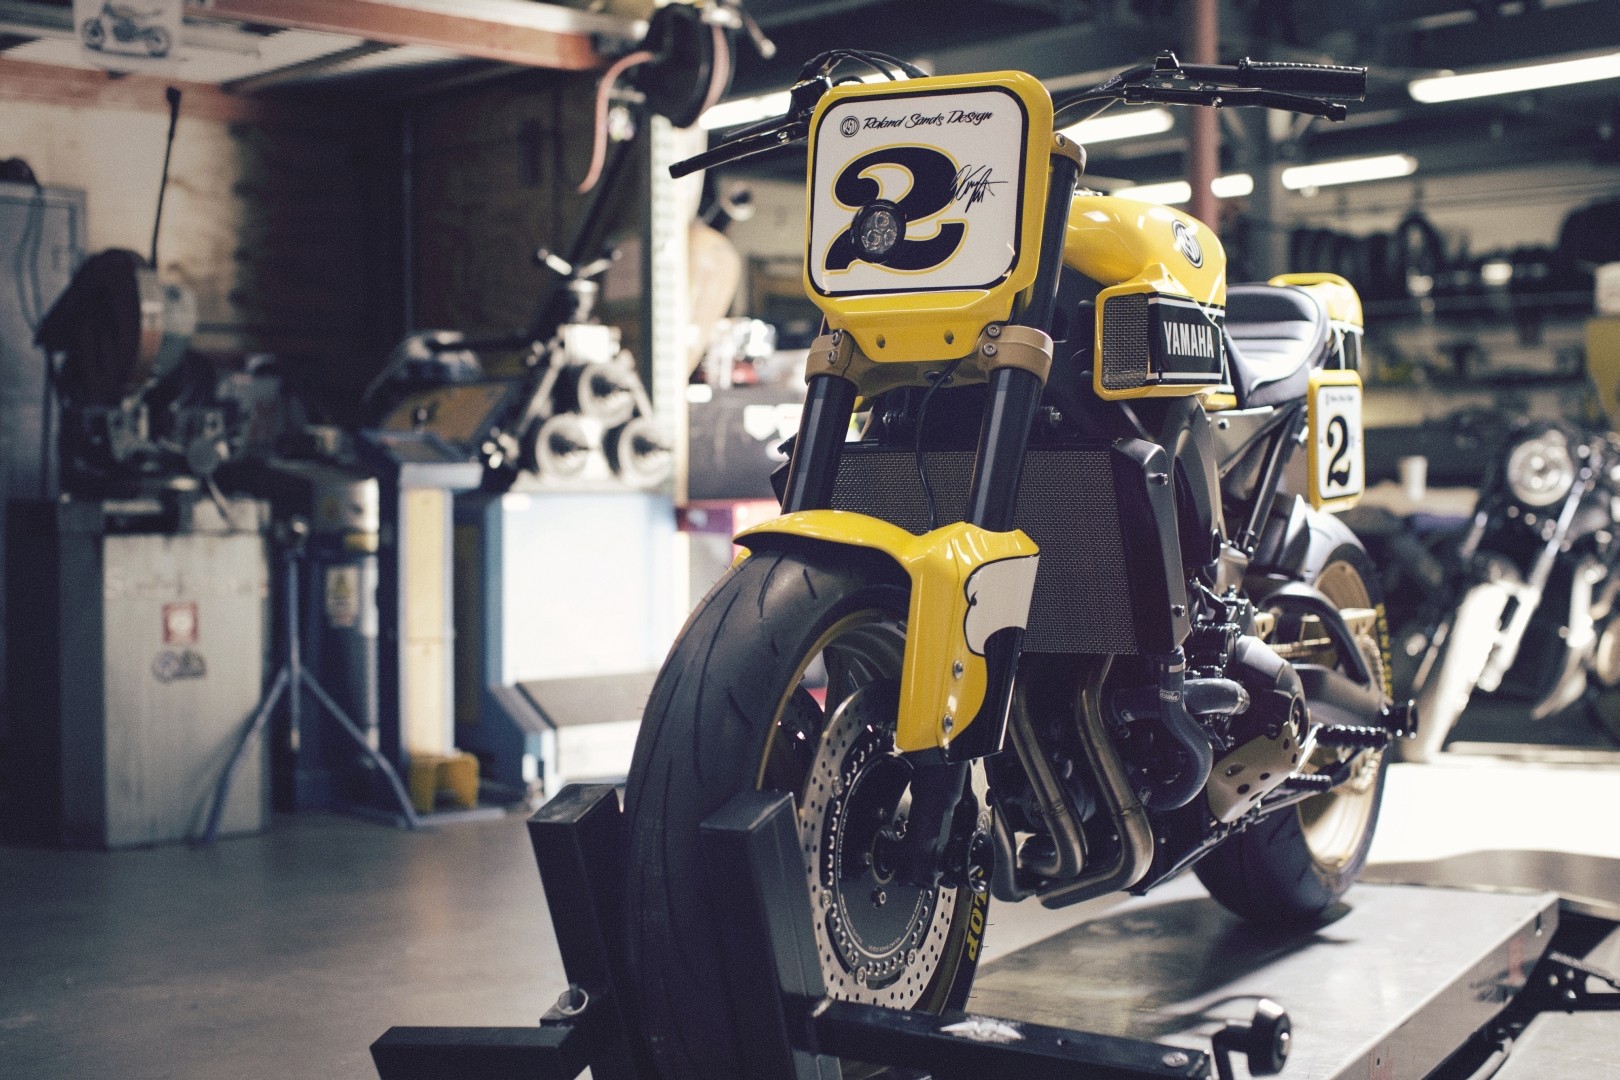 support gps - Démontage support de phare et neiman  Roland-sands-faster-wasp-previews-the-yamaha-xsr900-photo-gallery_13